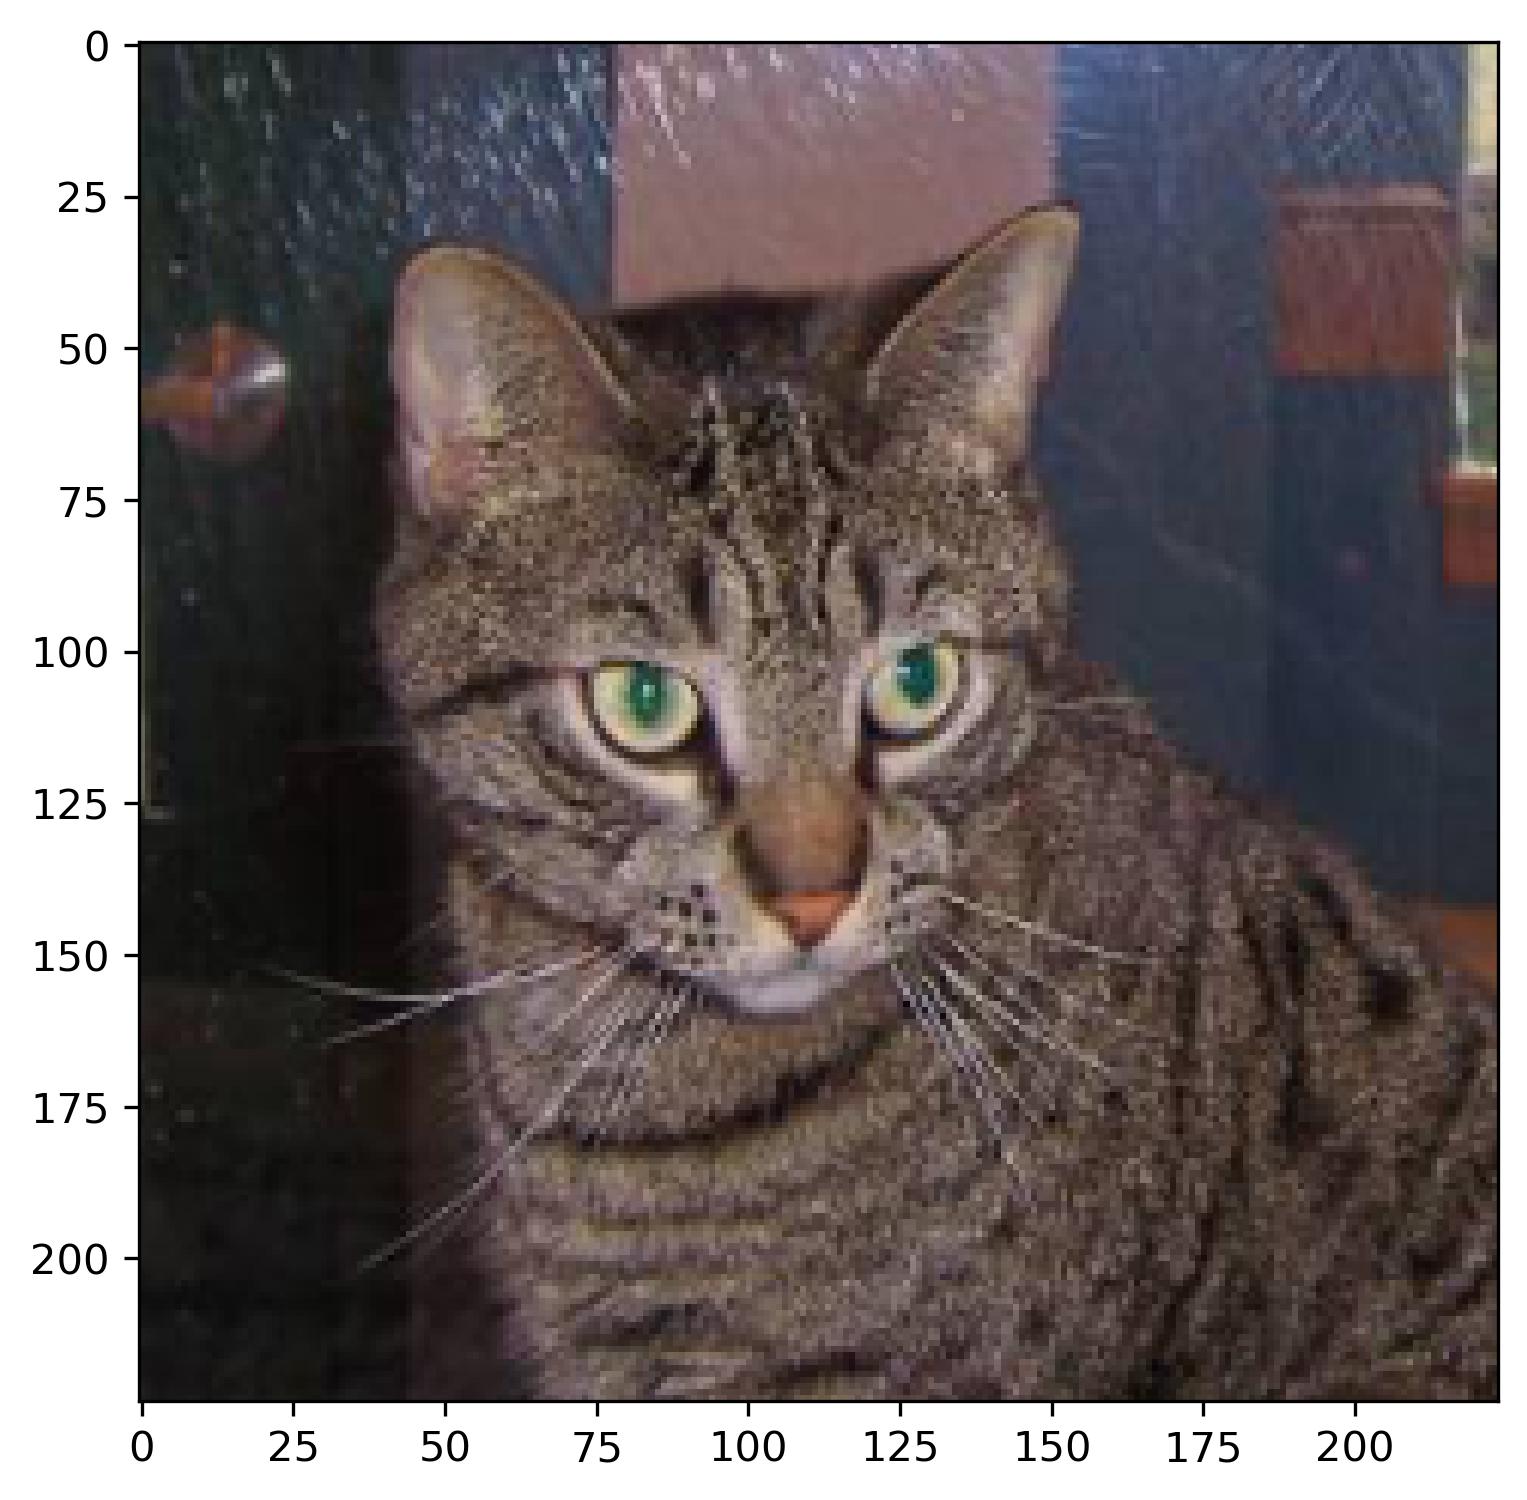 Image 3 - Cat image after resizing and rescaling (image by author)